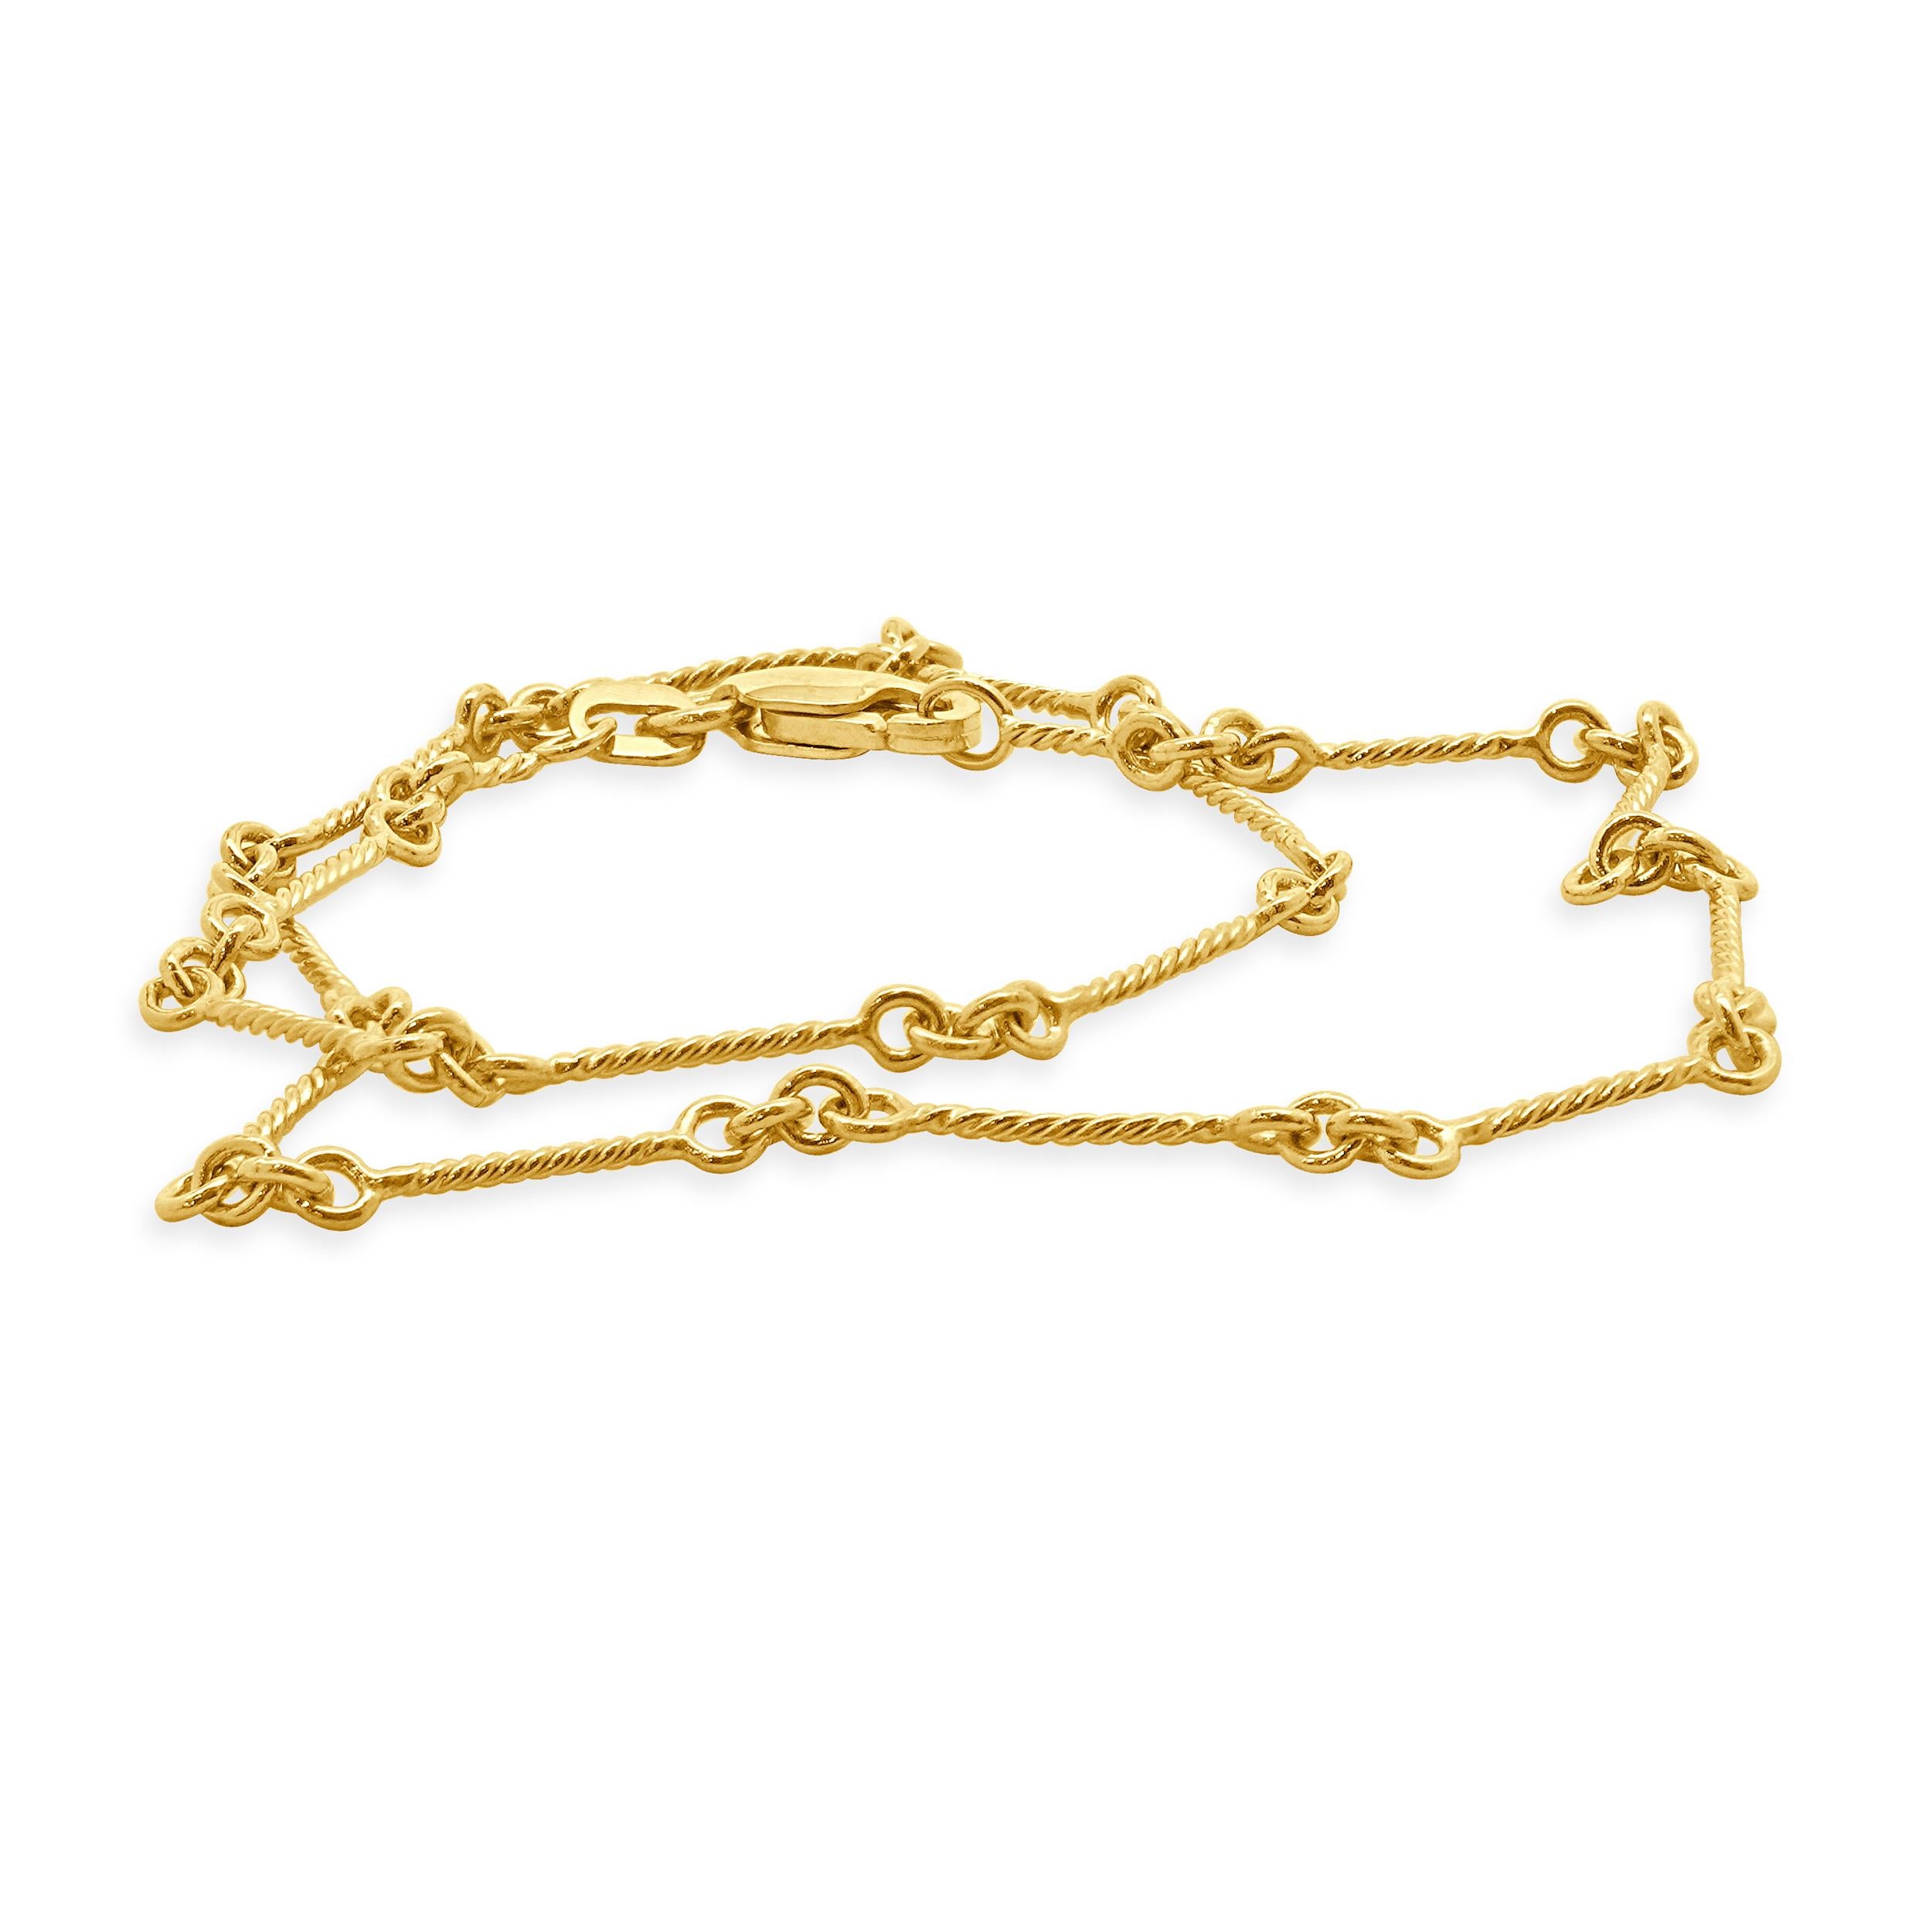 Material: 14K yellow gold
Dimensions: bracelet will fit up to a 10 1/8-inch wrist
Weight: 2.65 grams
